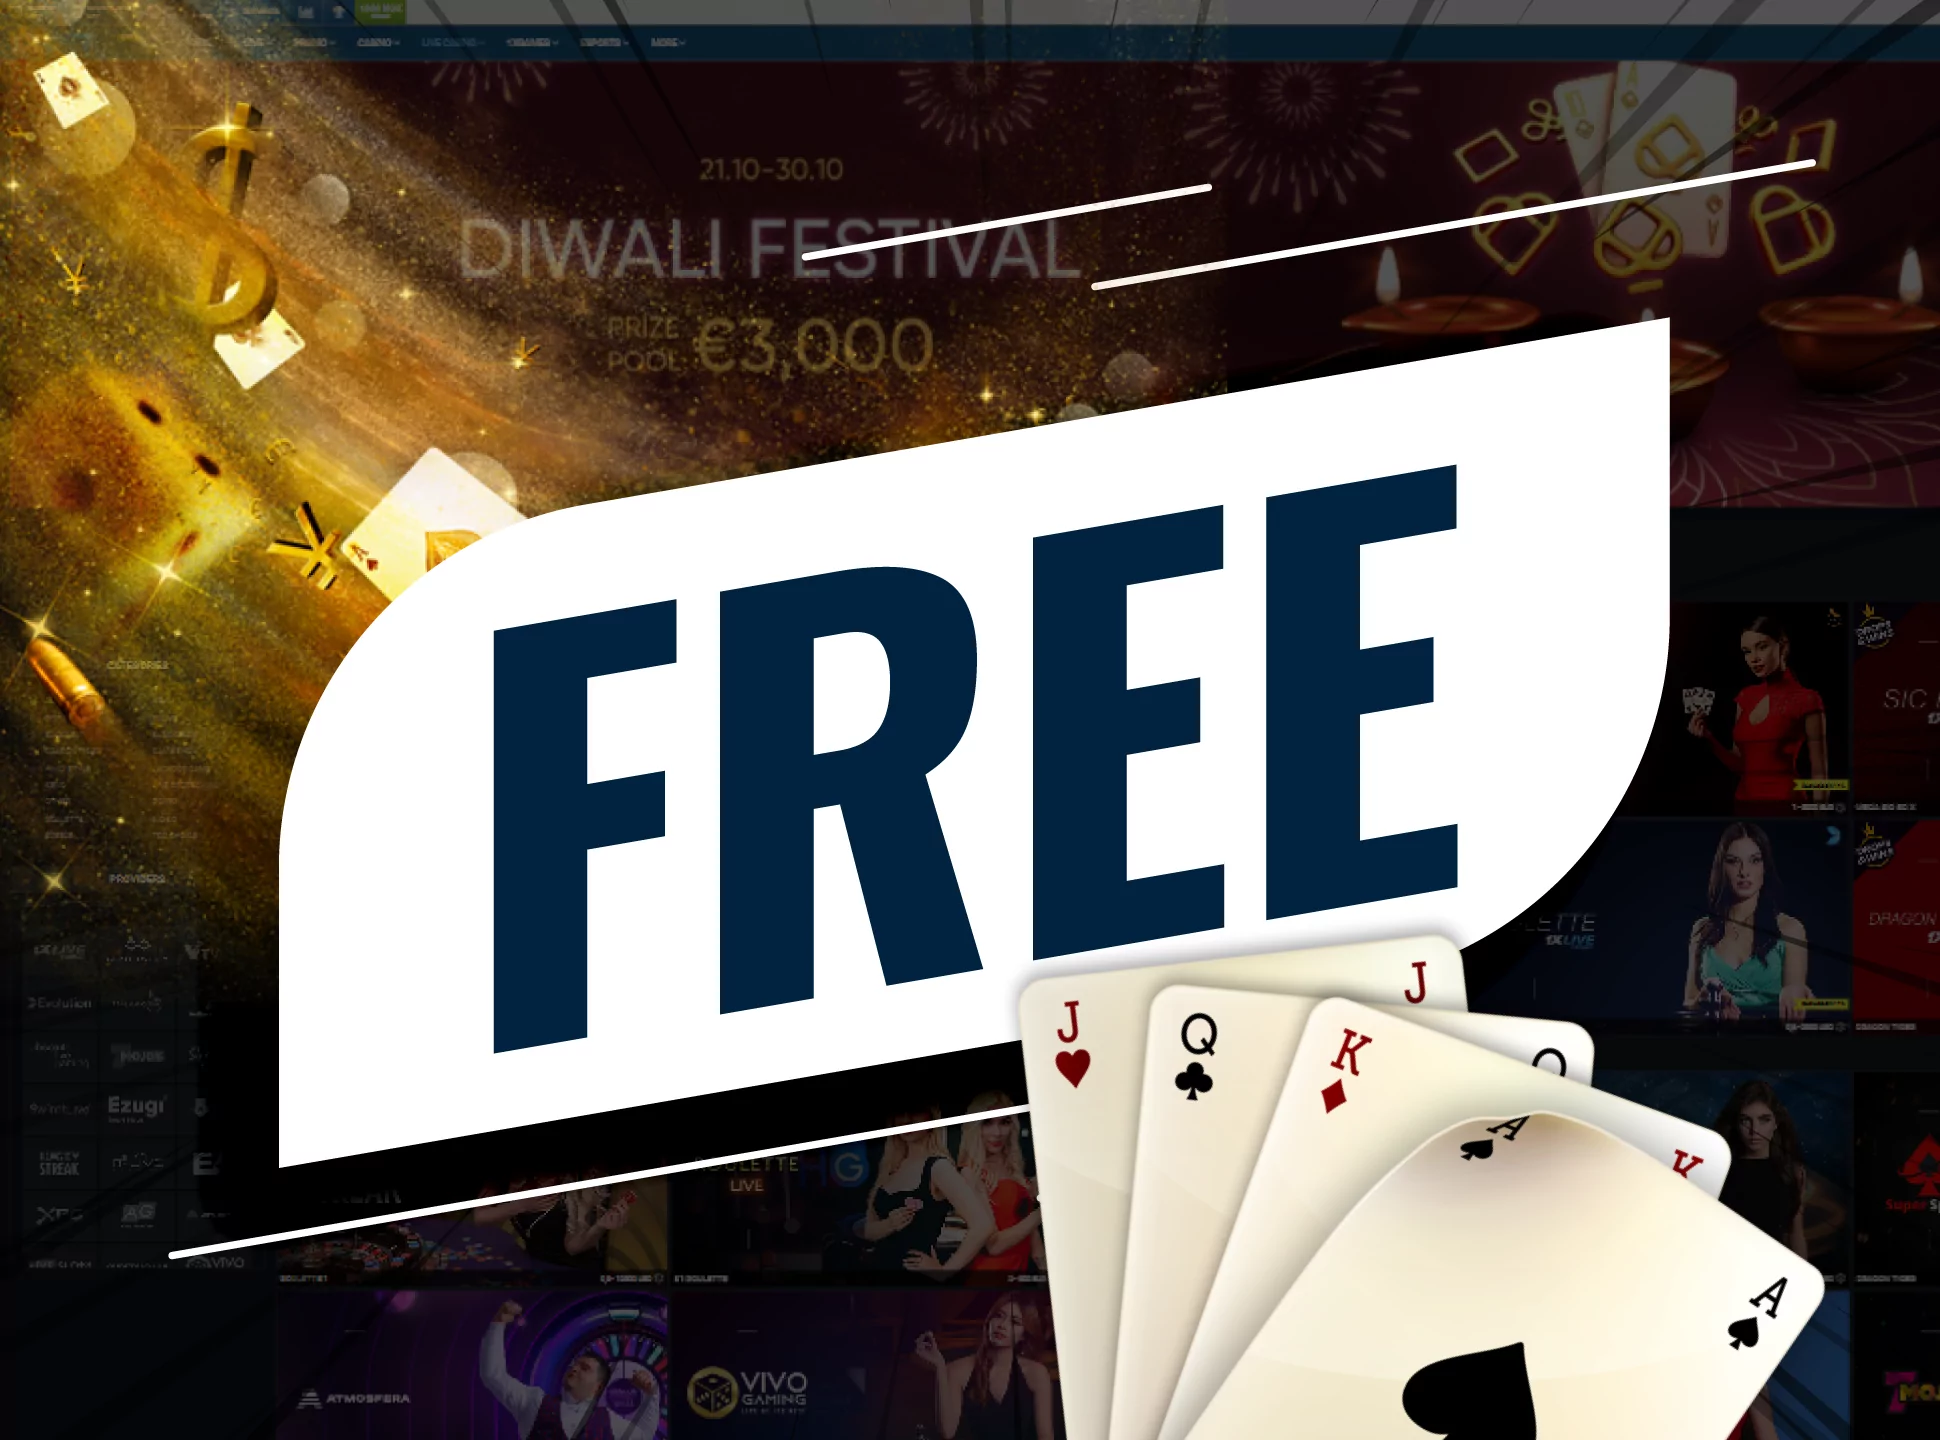 You can use free spins to try the games in an online casino.